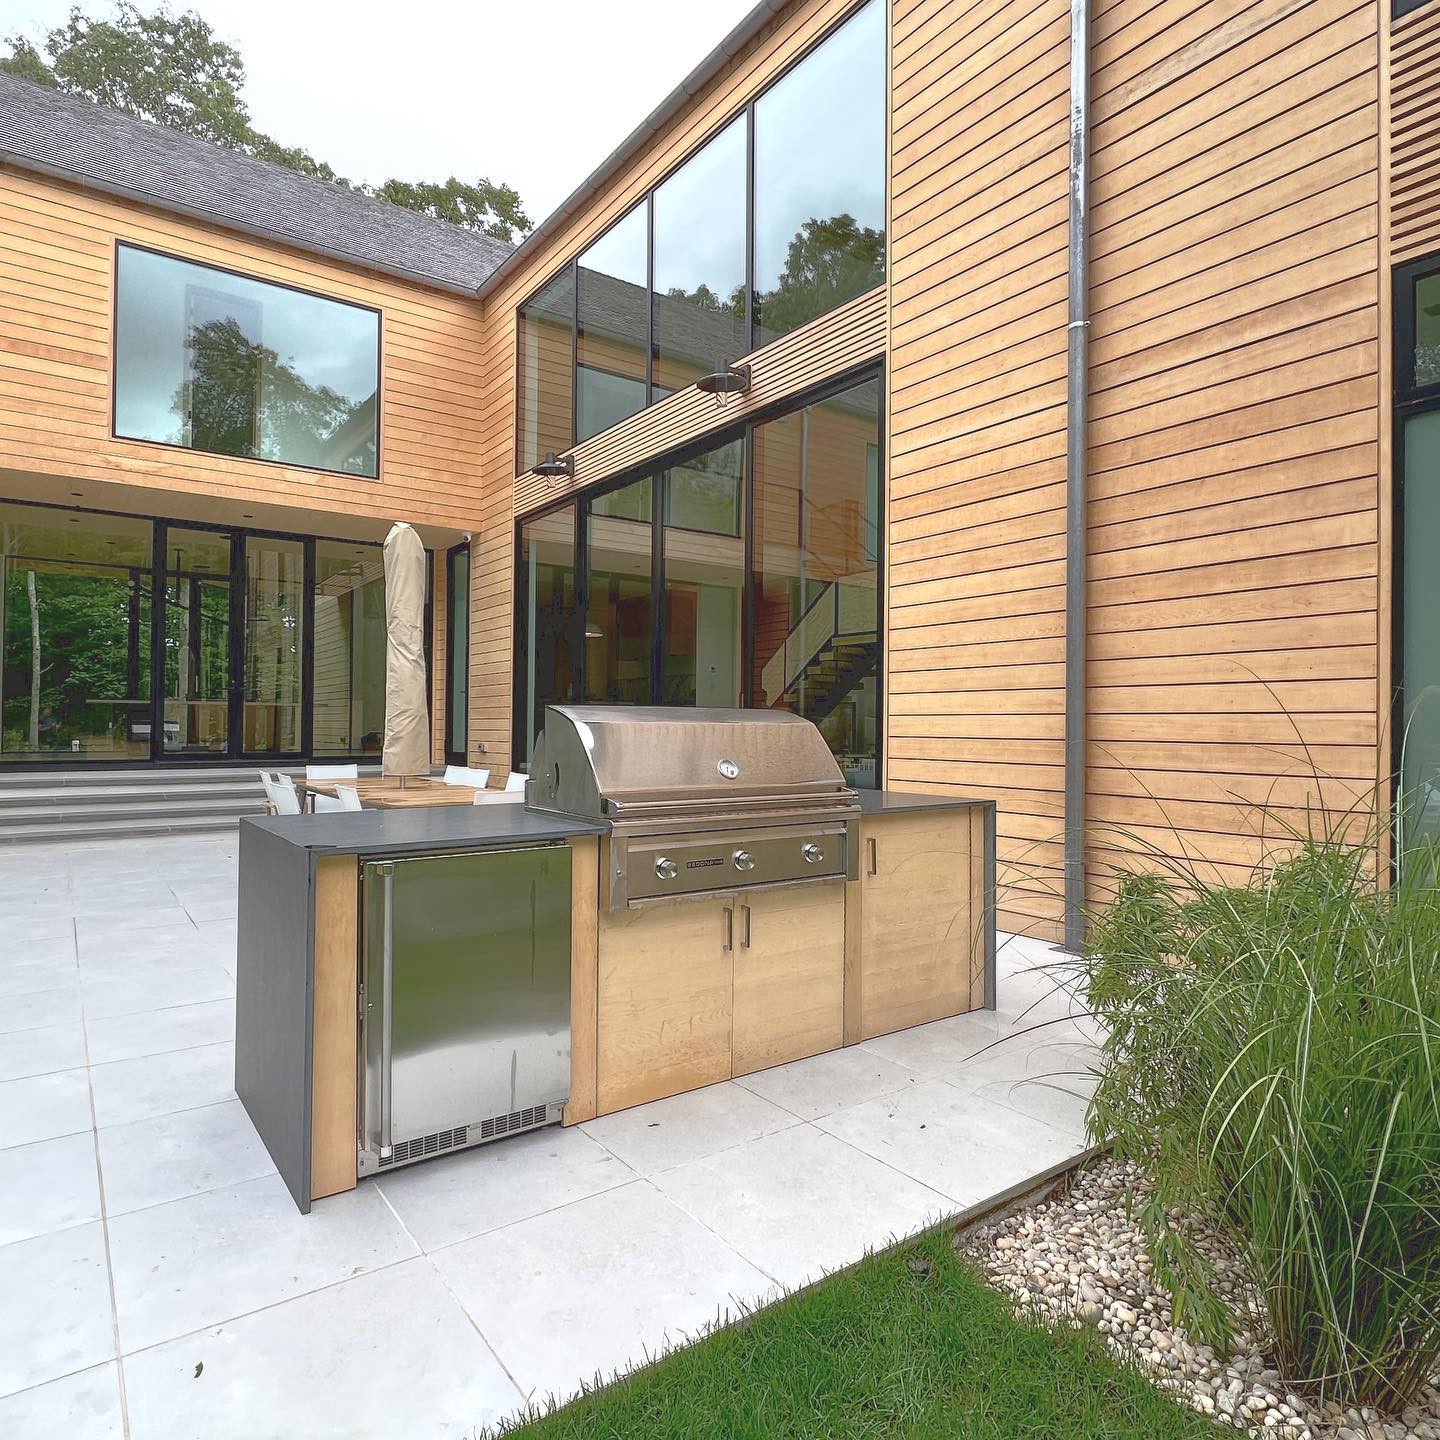 Entertaining and grilling for many seasons to come!

#amagansett #hamptons #home #outdoorkitchen #patio @themarvinbrand #modern #cedar #architect